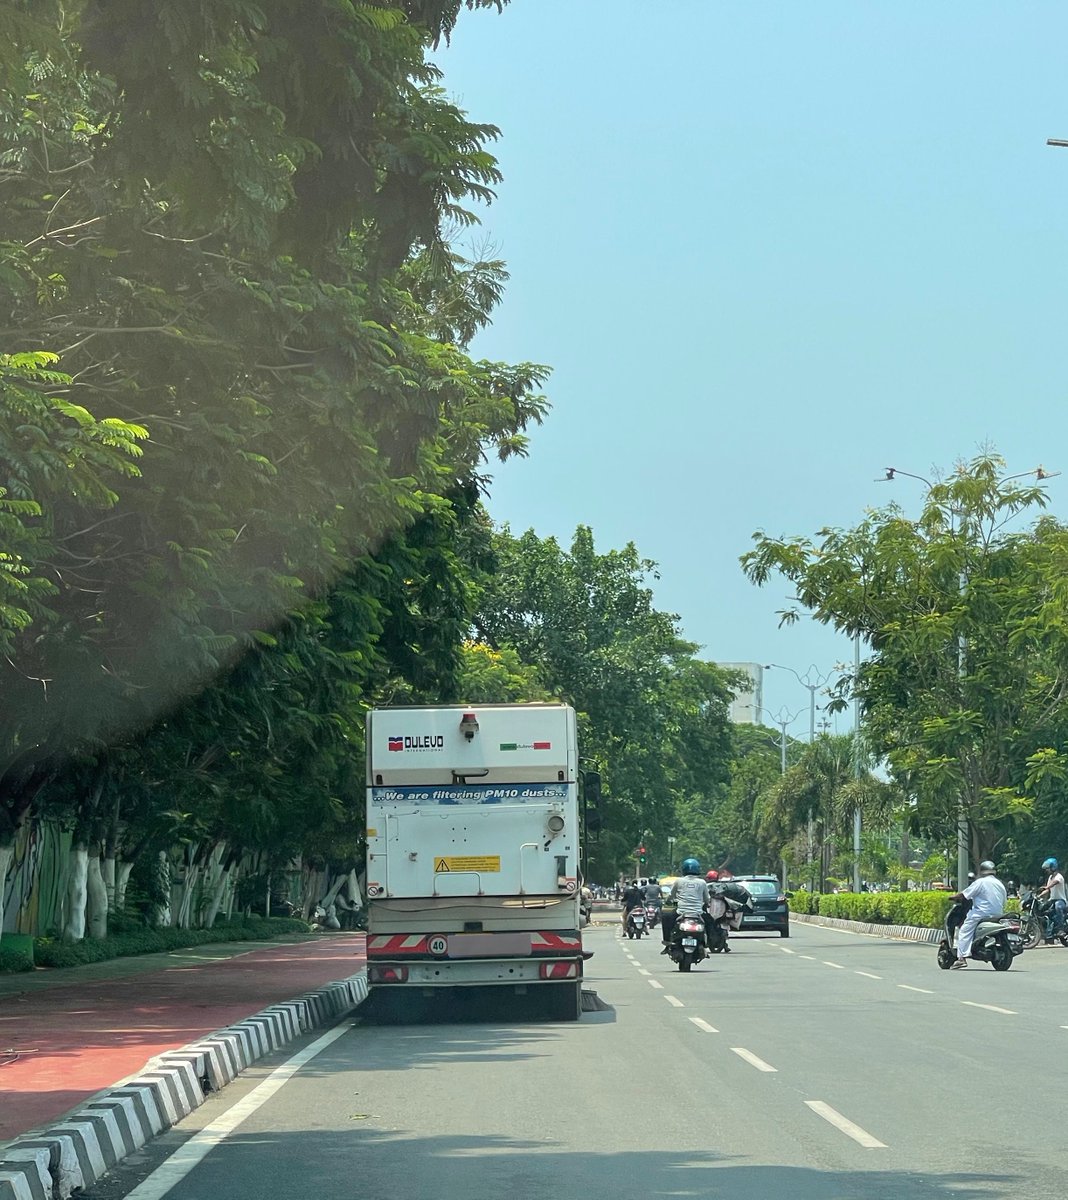 The mechanized road sweeping is ON to filter PM10 dusts. #Bhubaneswar